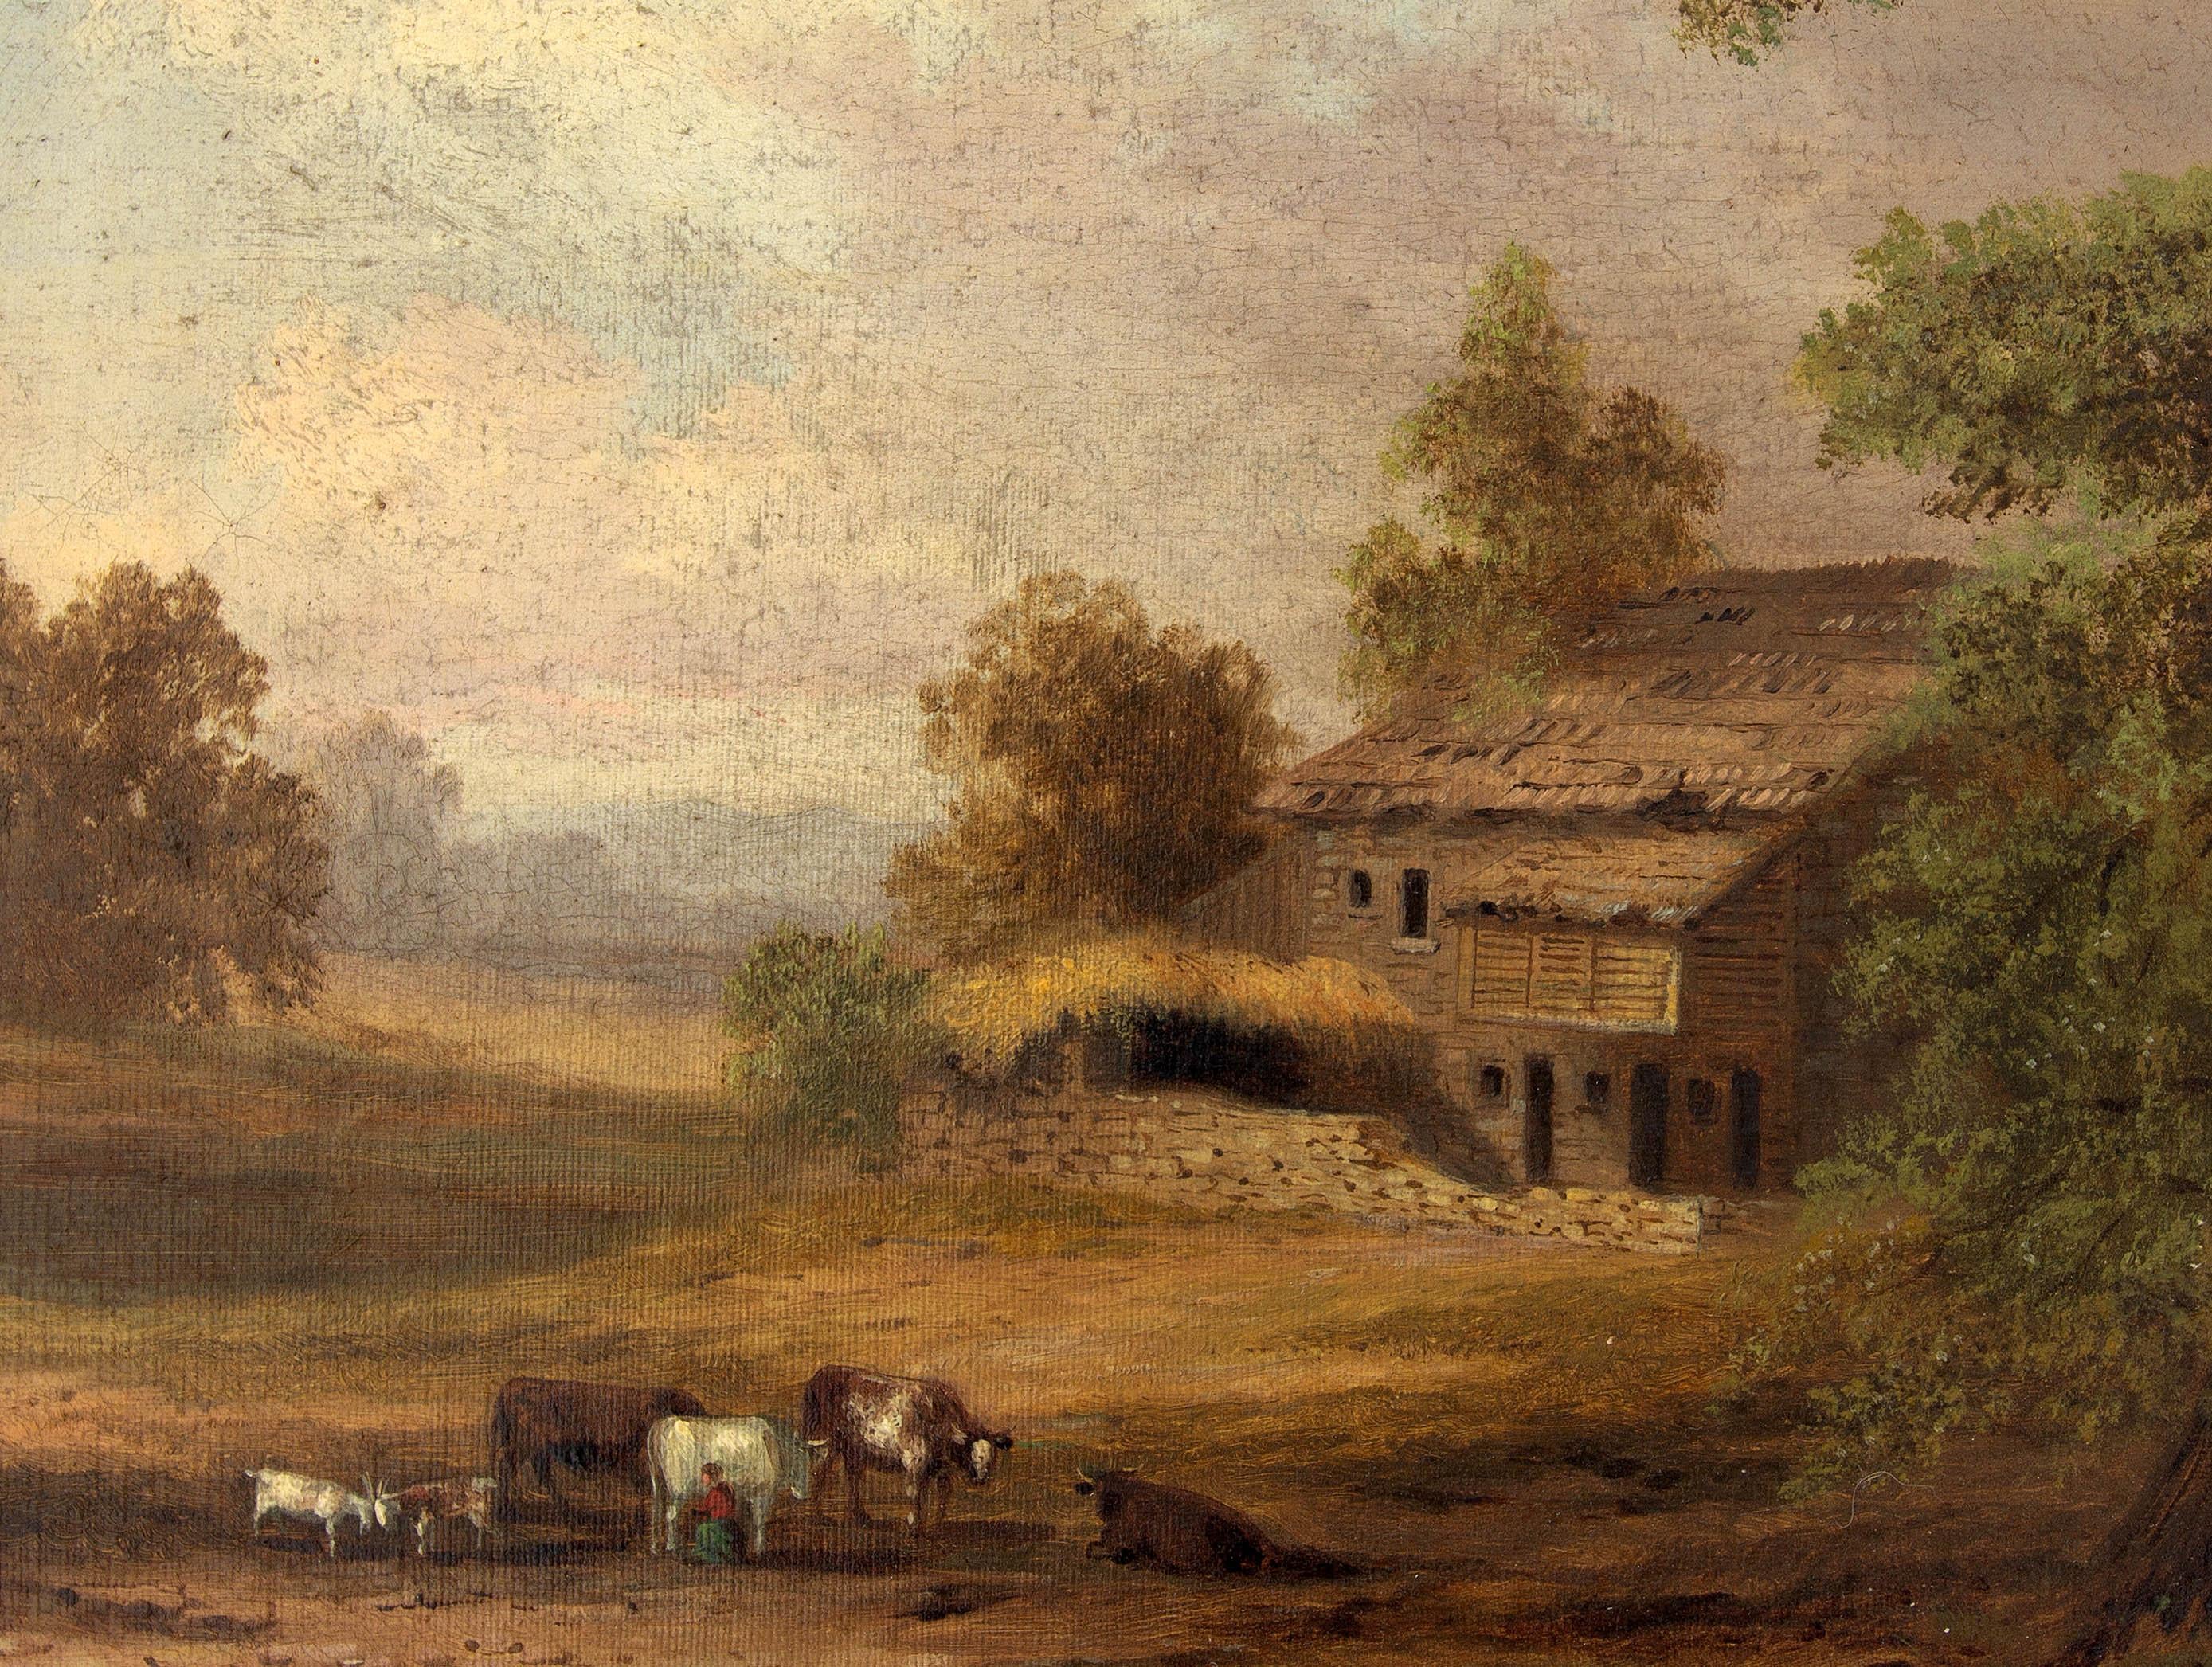 Hudson River school farm scene. Oil painting on canvas. In original gold leaf frame, mid-19th century. Unsigned.